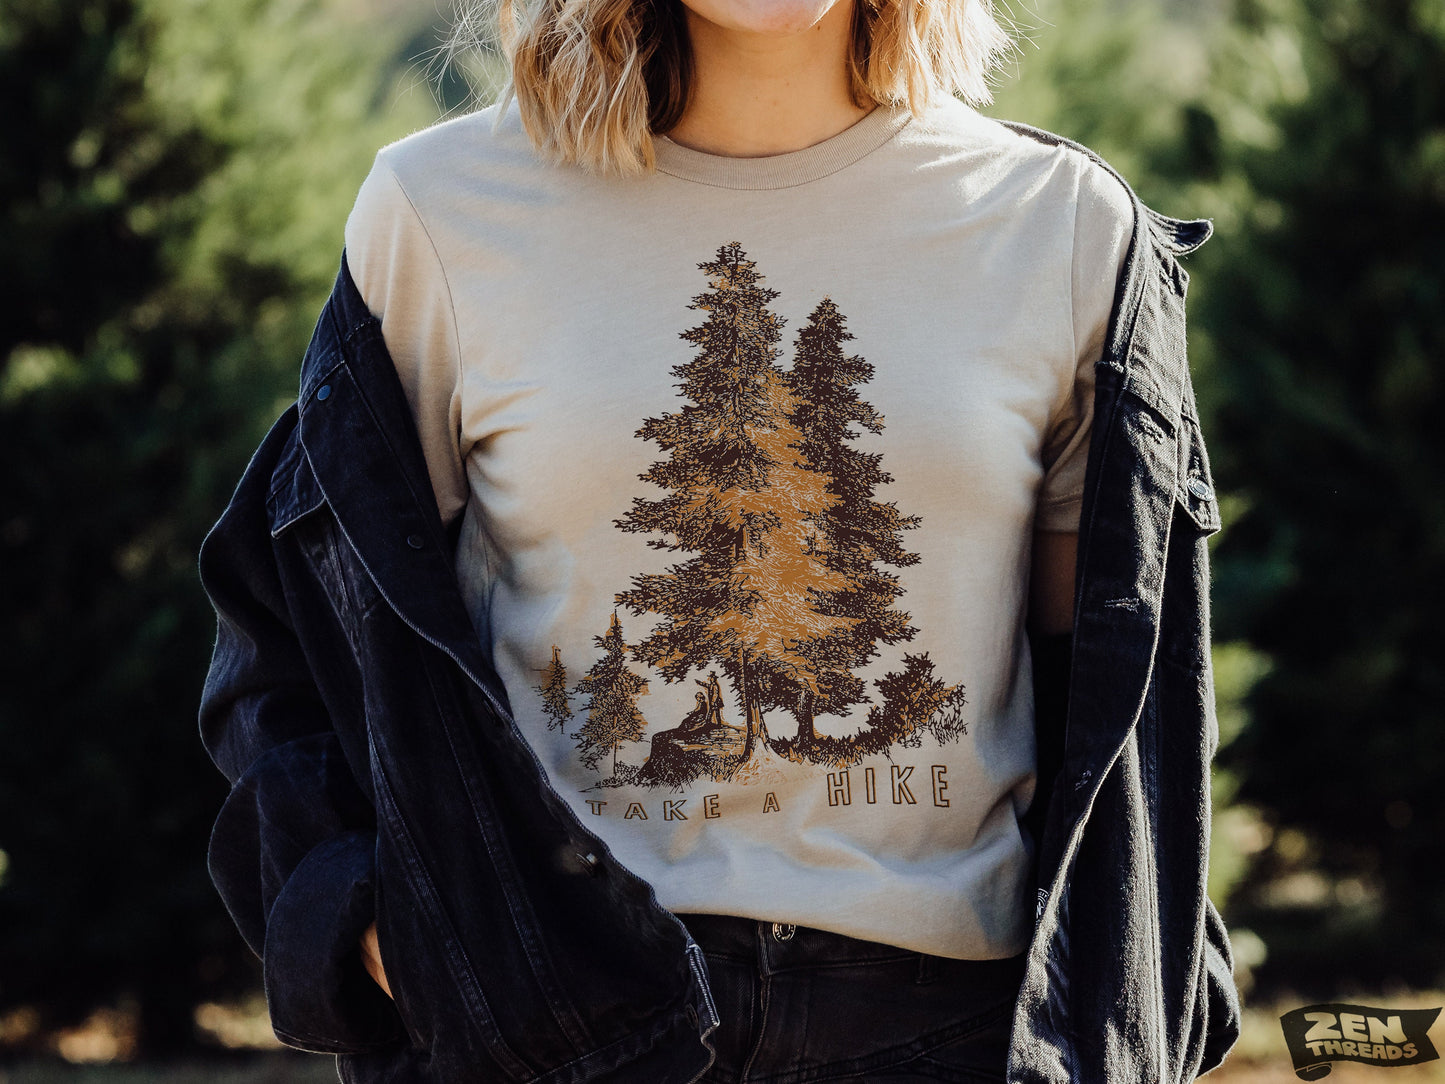 TAKE A HIKE adventure Unisex mens women's T-Shirt custom color printed tee hiking camping travel national park forest landscape illustration